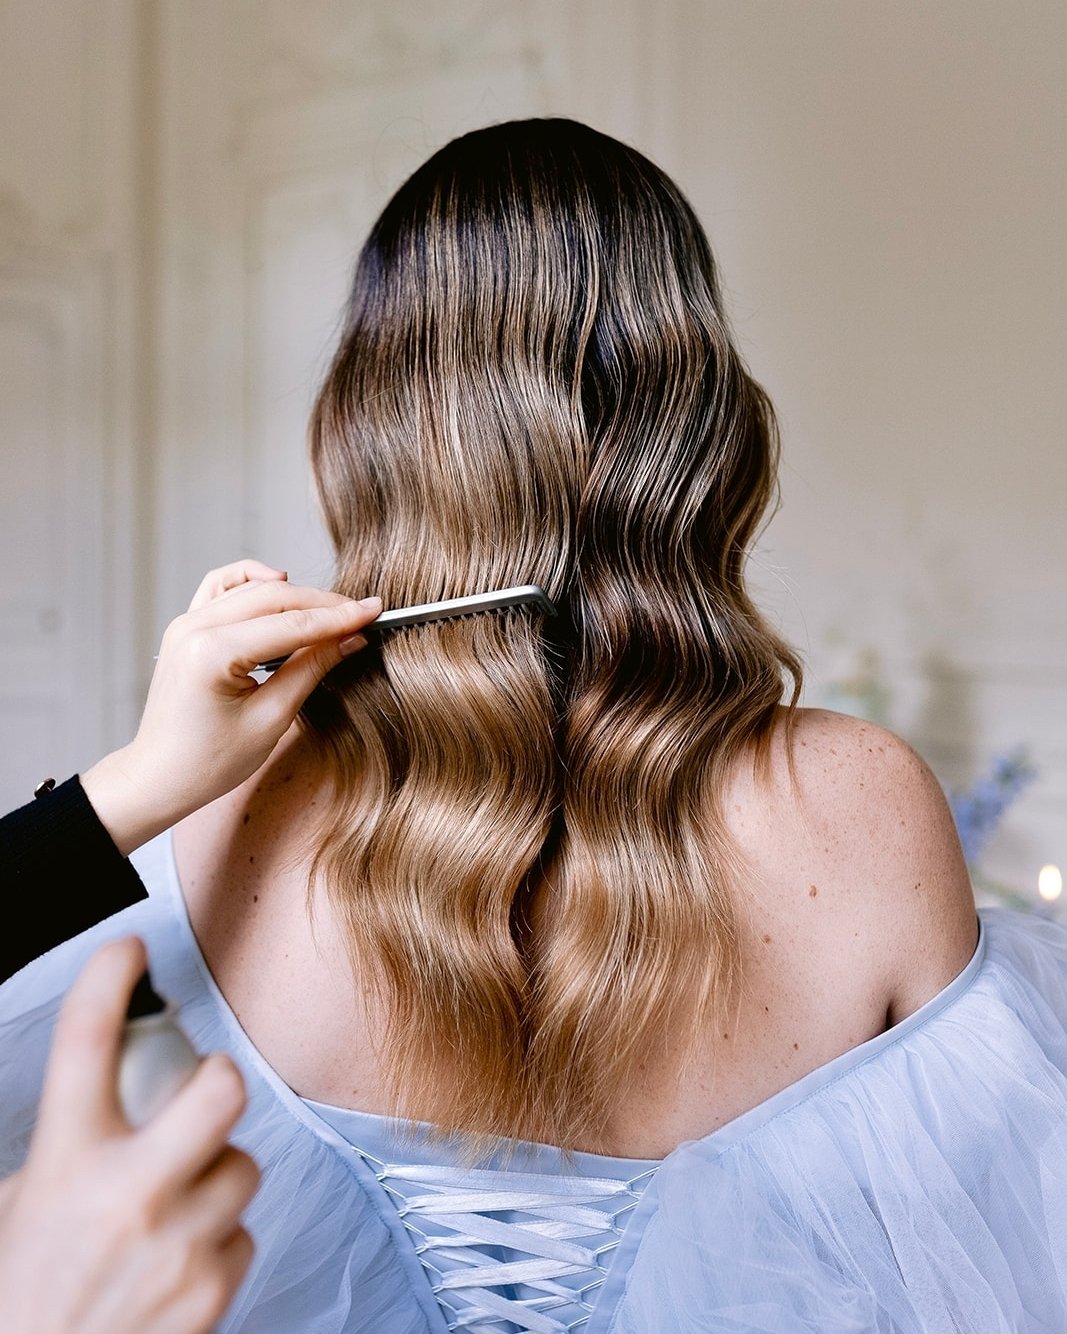 These days, sleek curls and waves are super IN, which means that your hair needs to be in great health if you want it to look shiny and smooth like this style 👰&zwj;♀️

If your hair is dry, brittle, frizzy, or color-treated and damaged, you'll have 